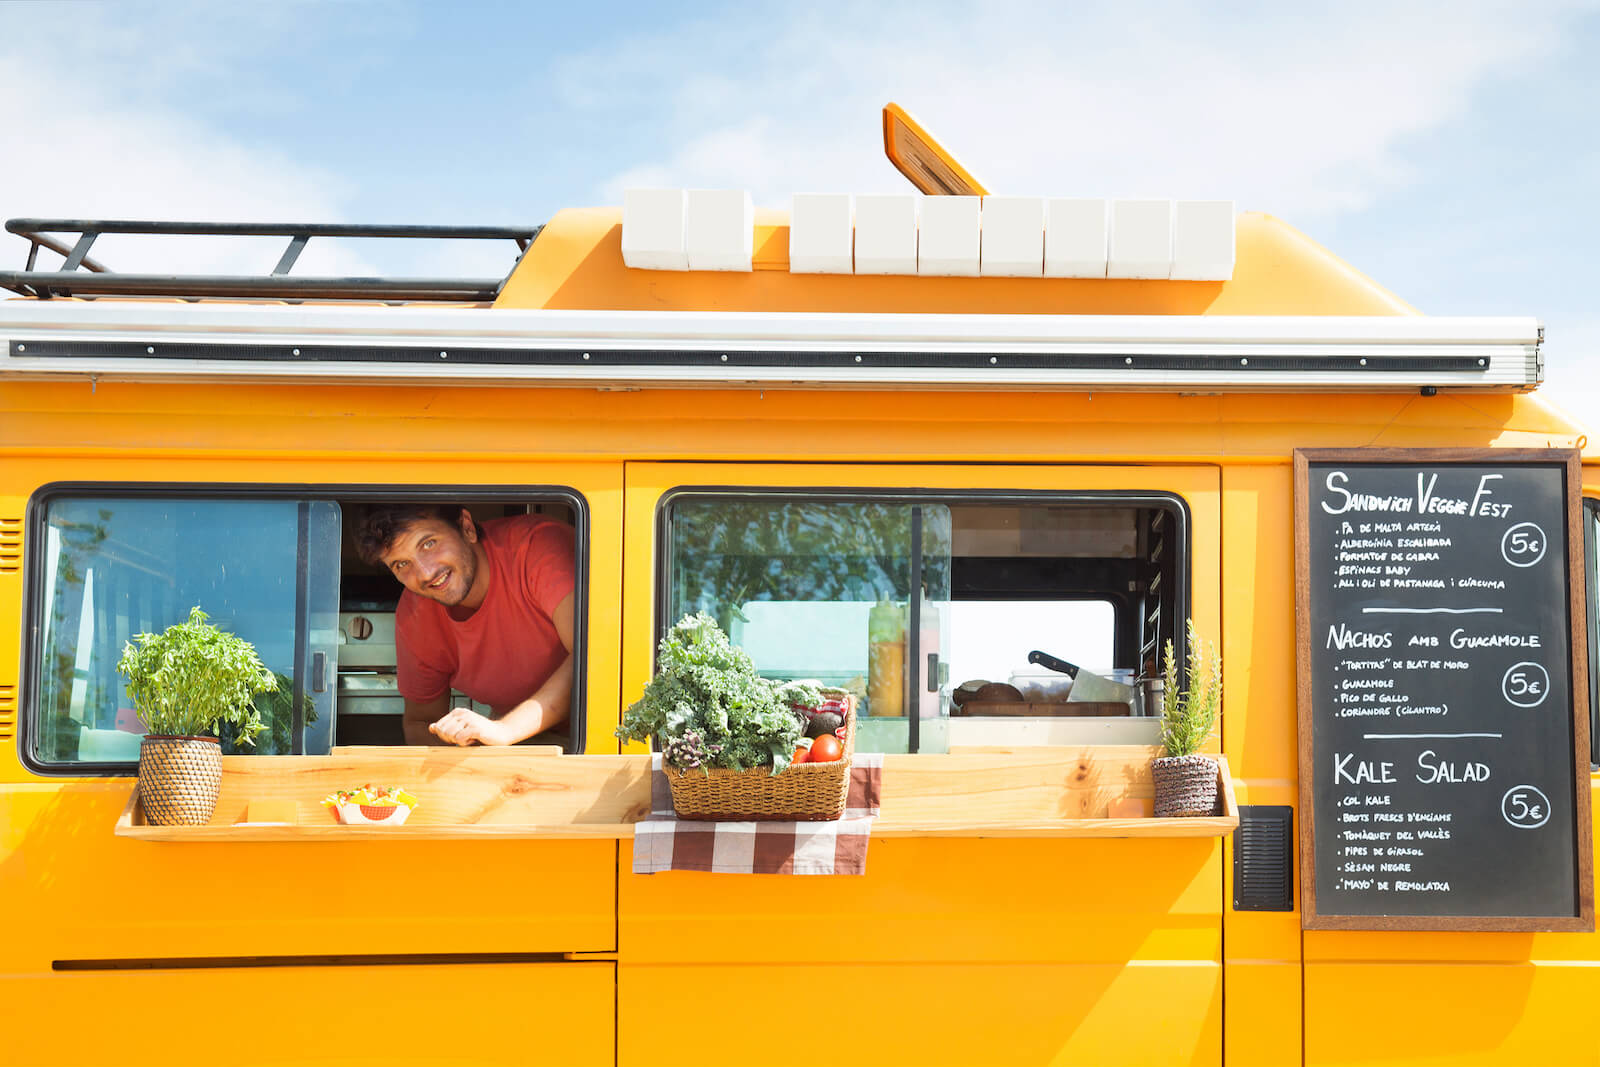 Make your guests come away from your event talking about the vegan food! View our collection of unique 'feel-good' vegan food vans that bring great plant-based food and great vibes to any occasion.